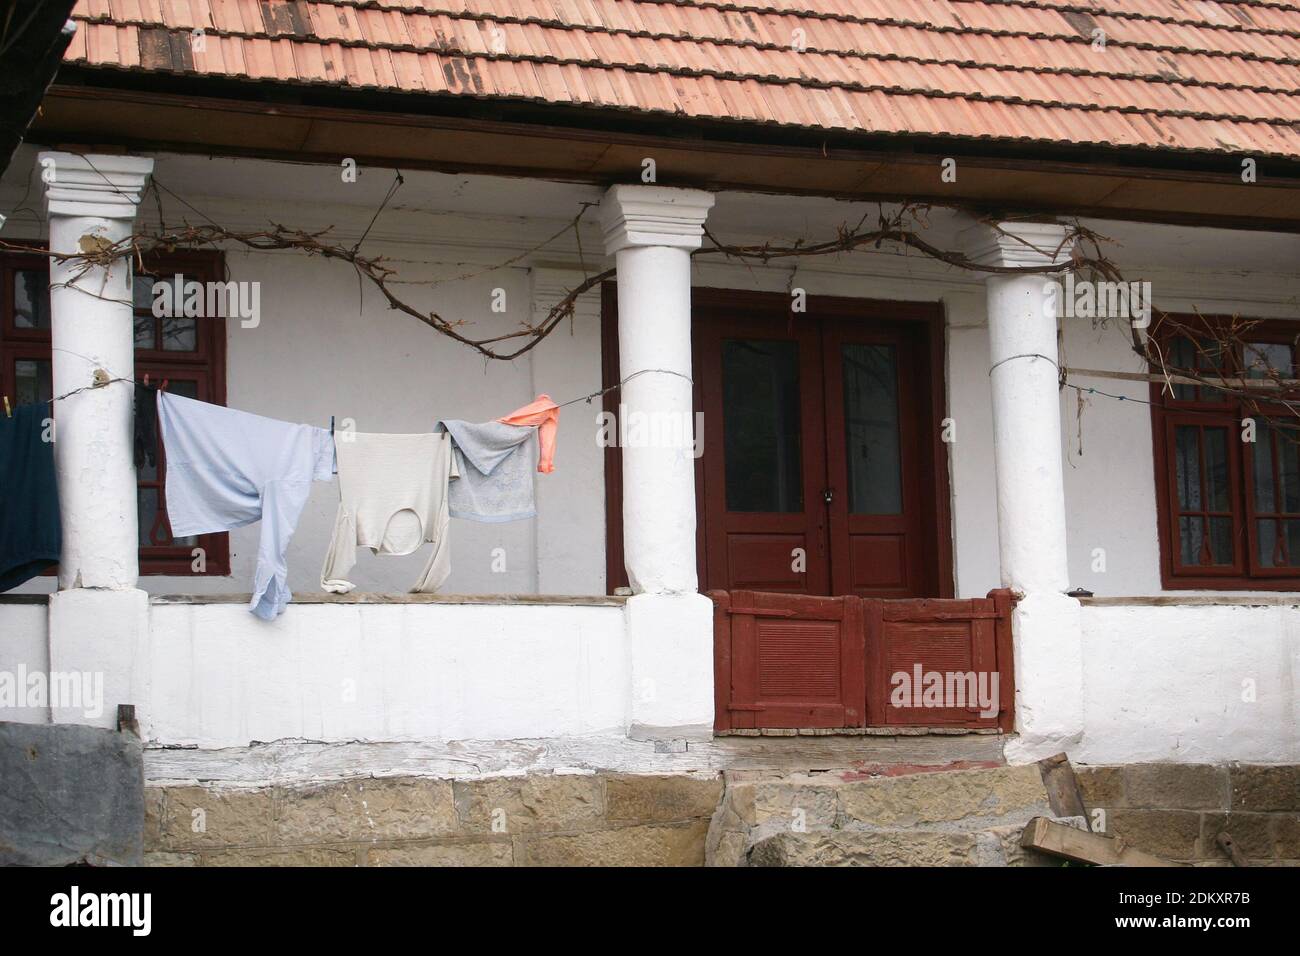 Vrancea County, Romania. Old traditional house with front porch. Stock Photo